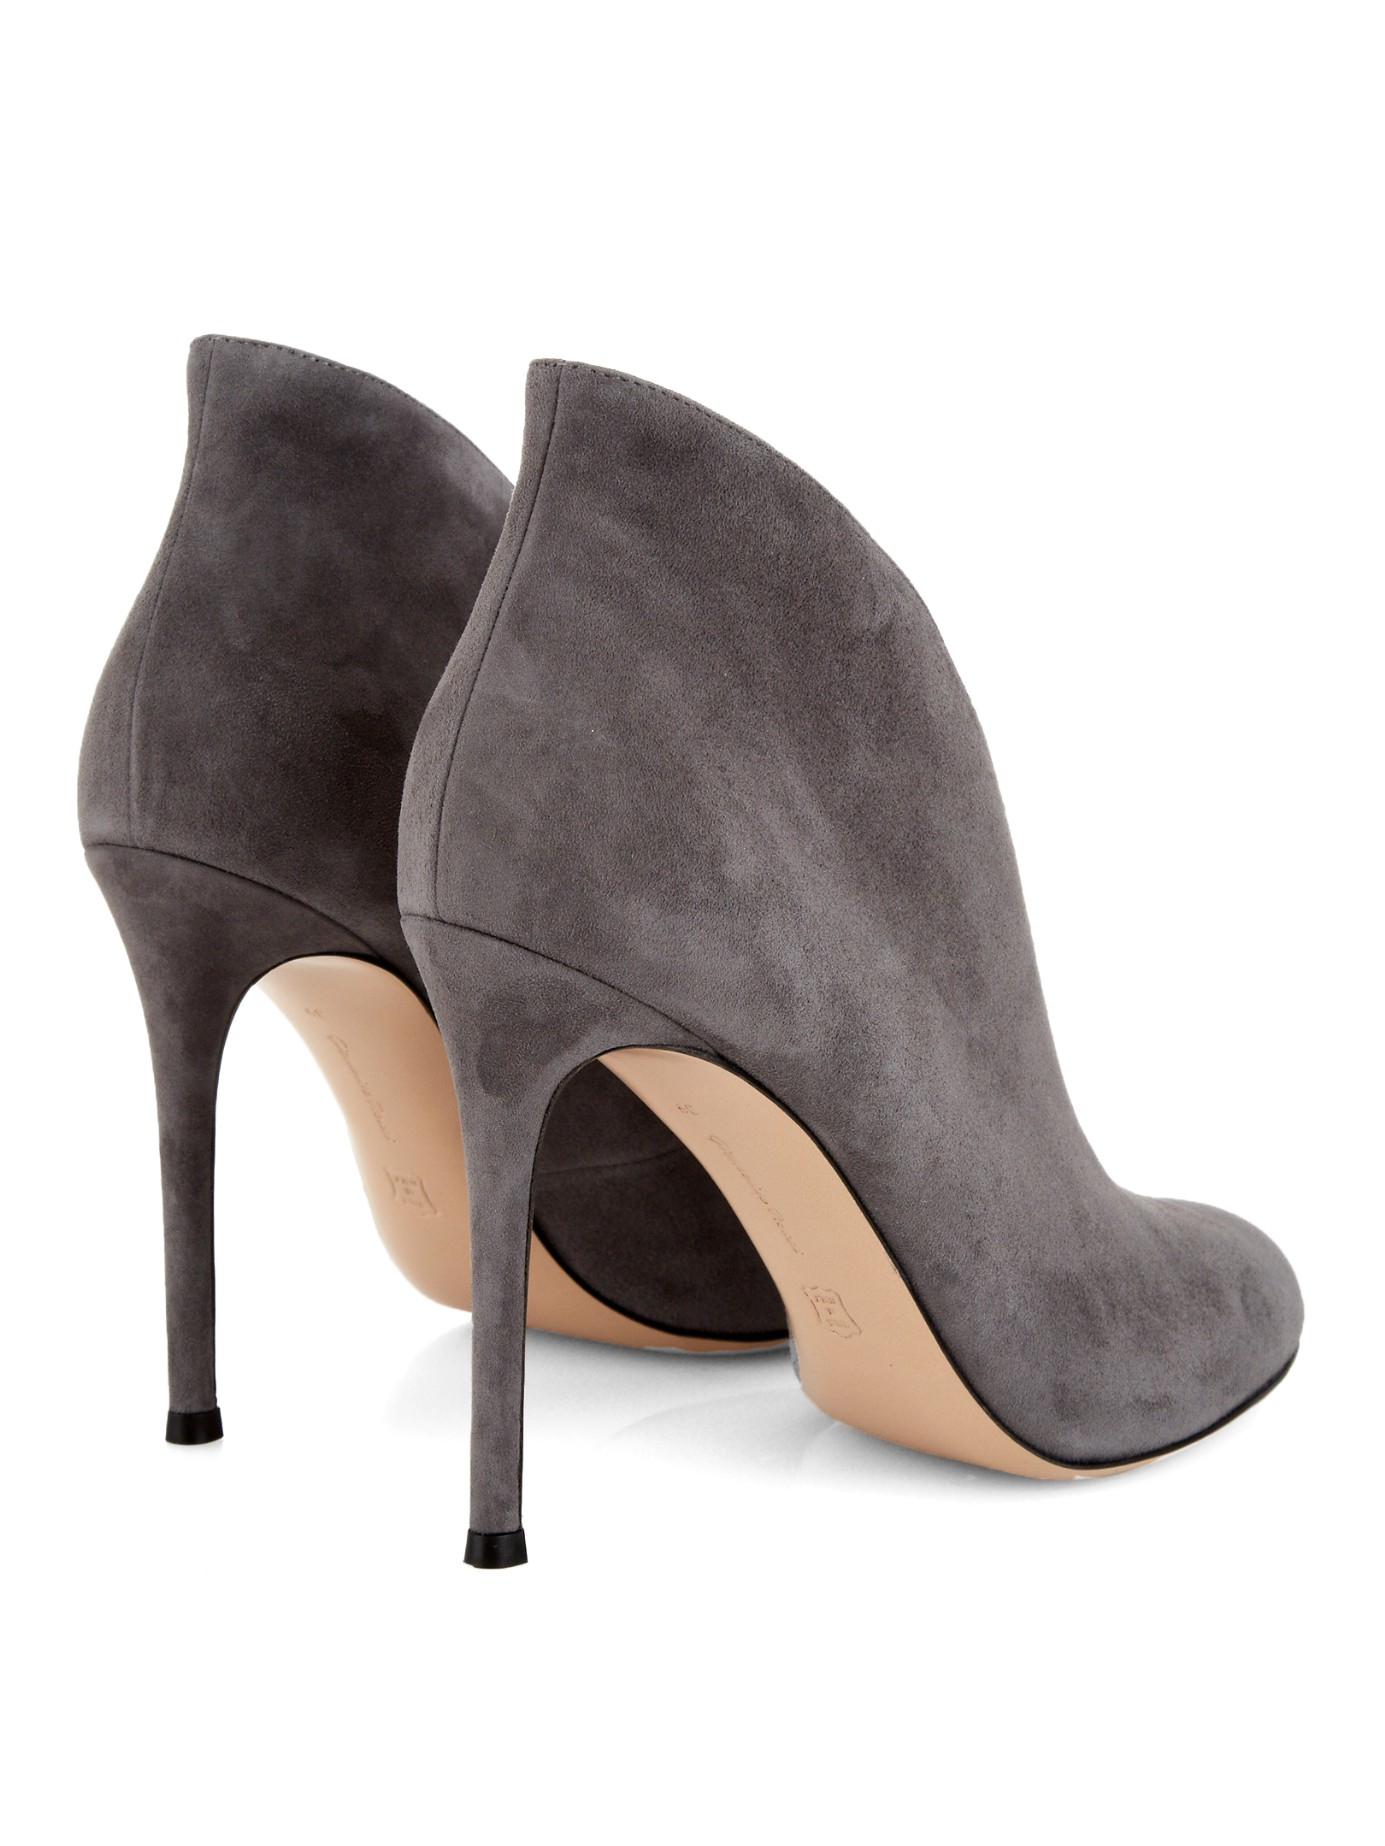 Gianvito Rossi Vamp Suede Ankle Boots in Gray | Lyst